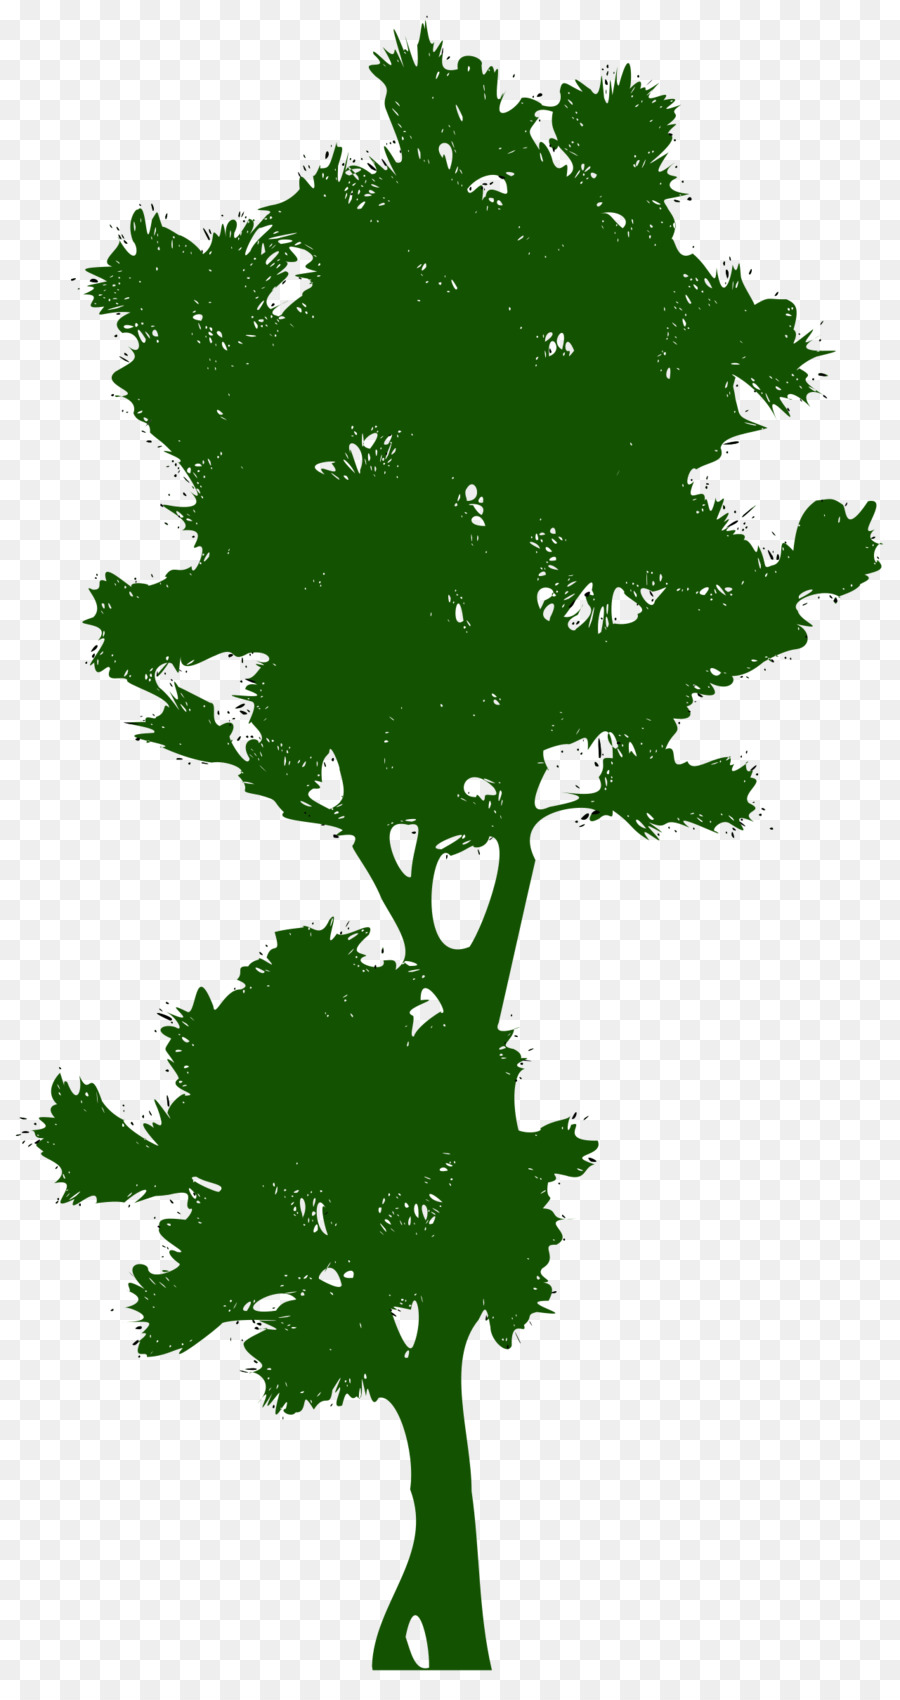 Tree Public domain Clip art - tall tree png download - 1281*2400 - Free Transparent Tree png Download.